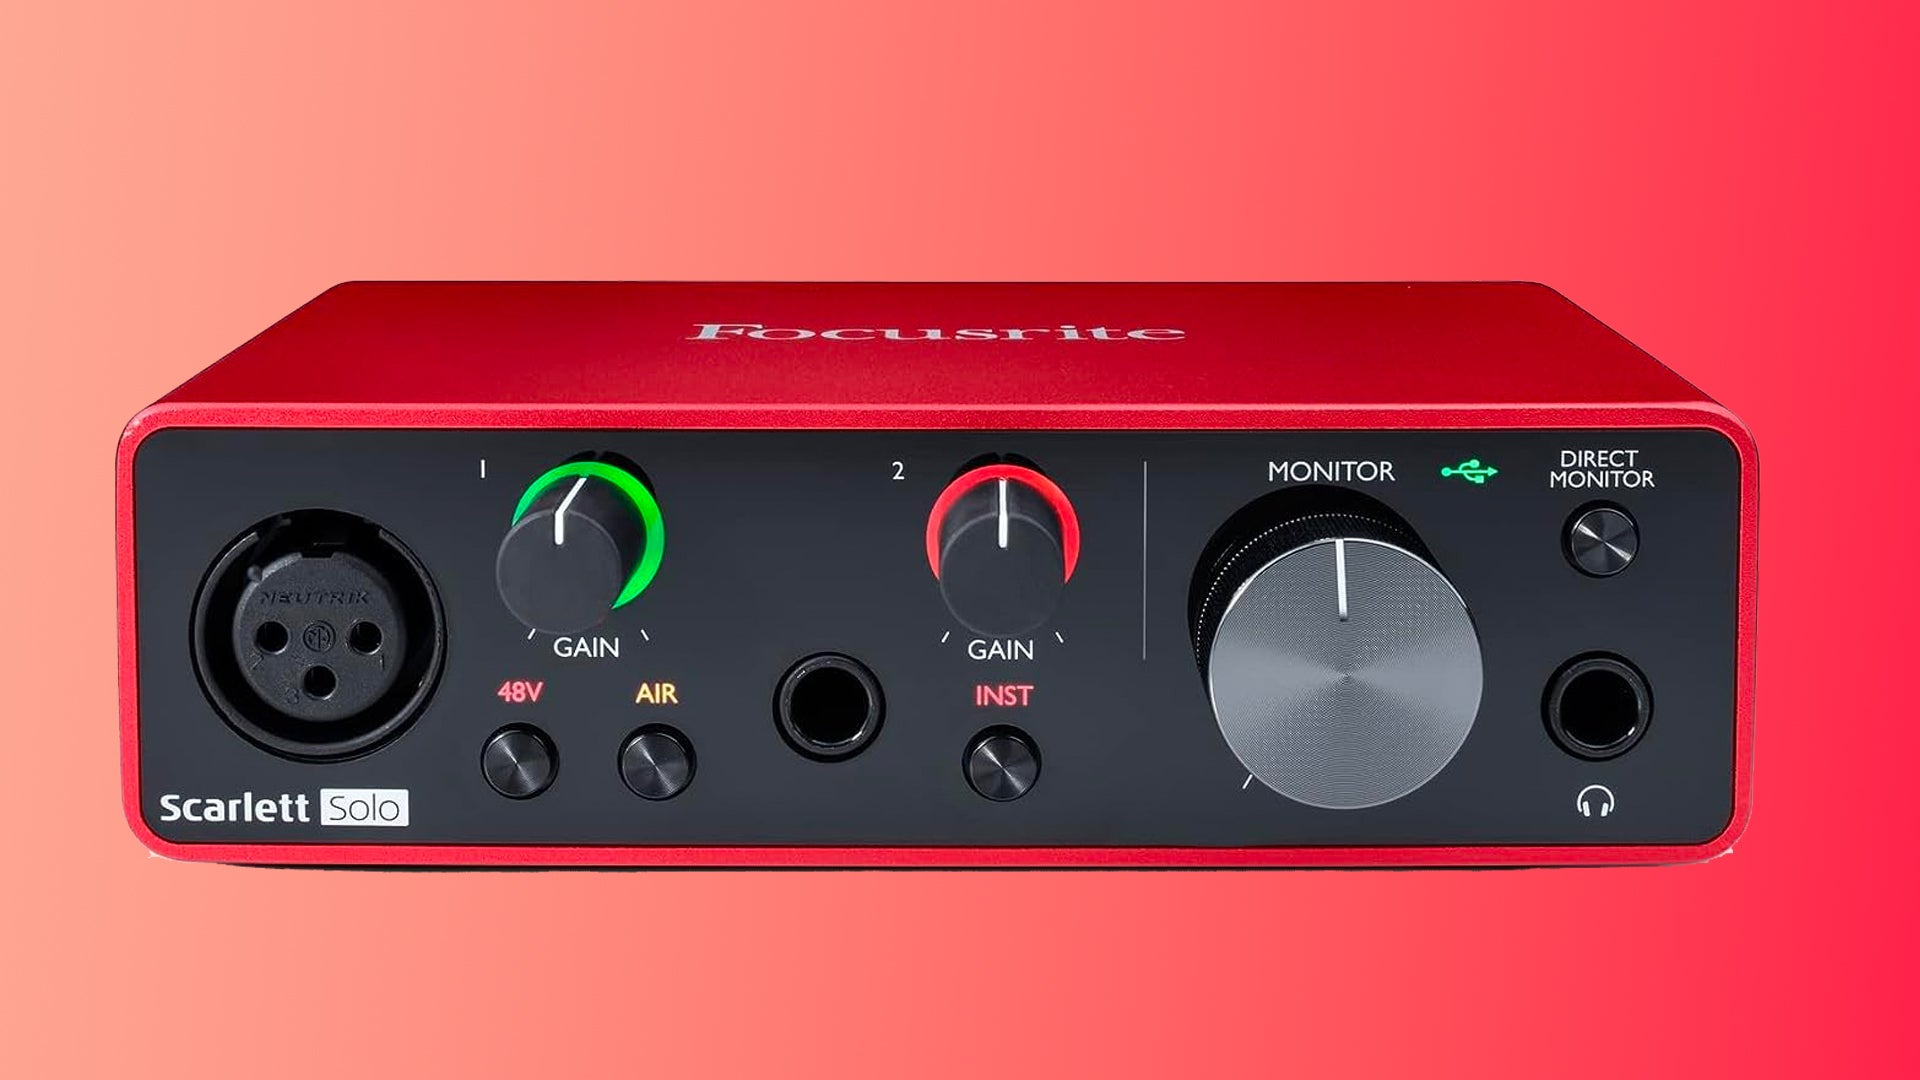 Upgrade your streaming setup with this Focusrite Scarlett Solo 